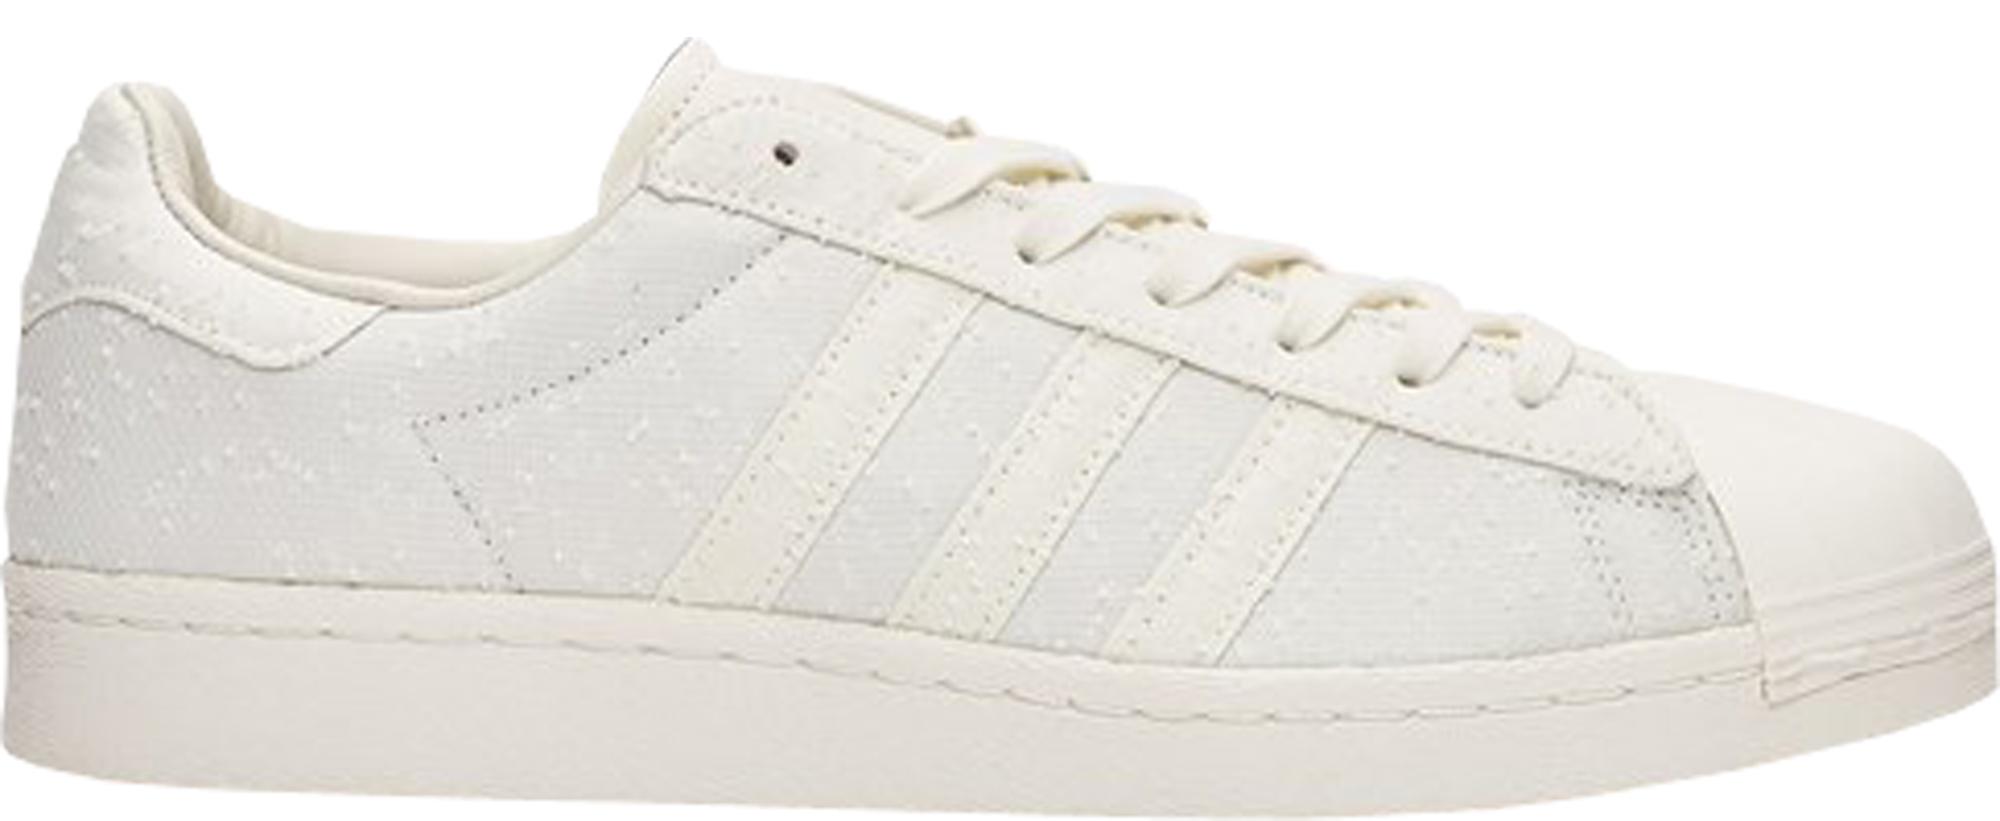 Sneakersnstuff x adidas Superstar Boost Shades of White V2 SNS